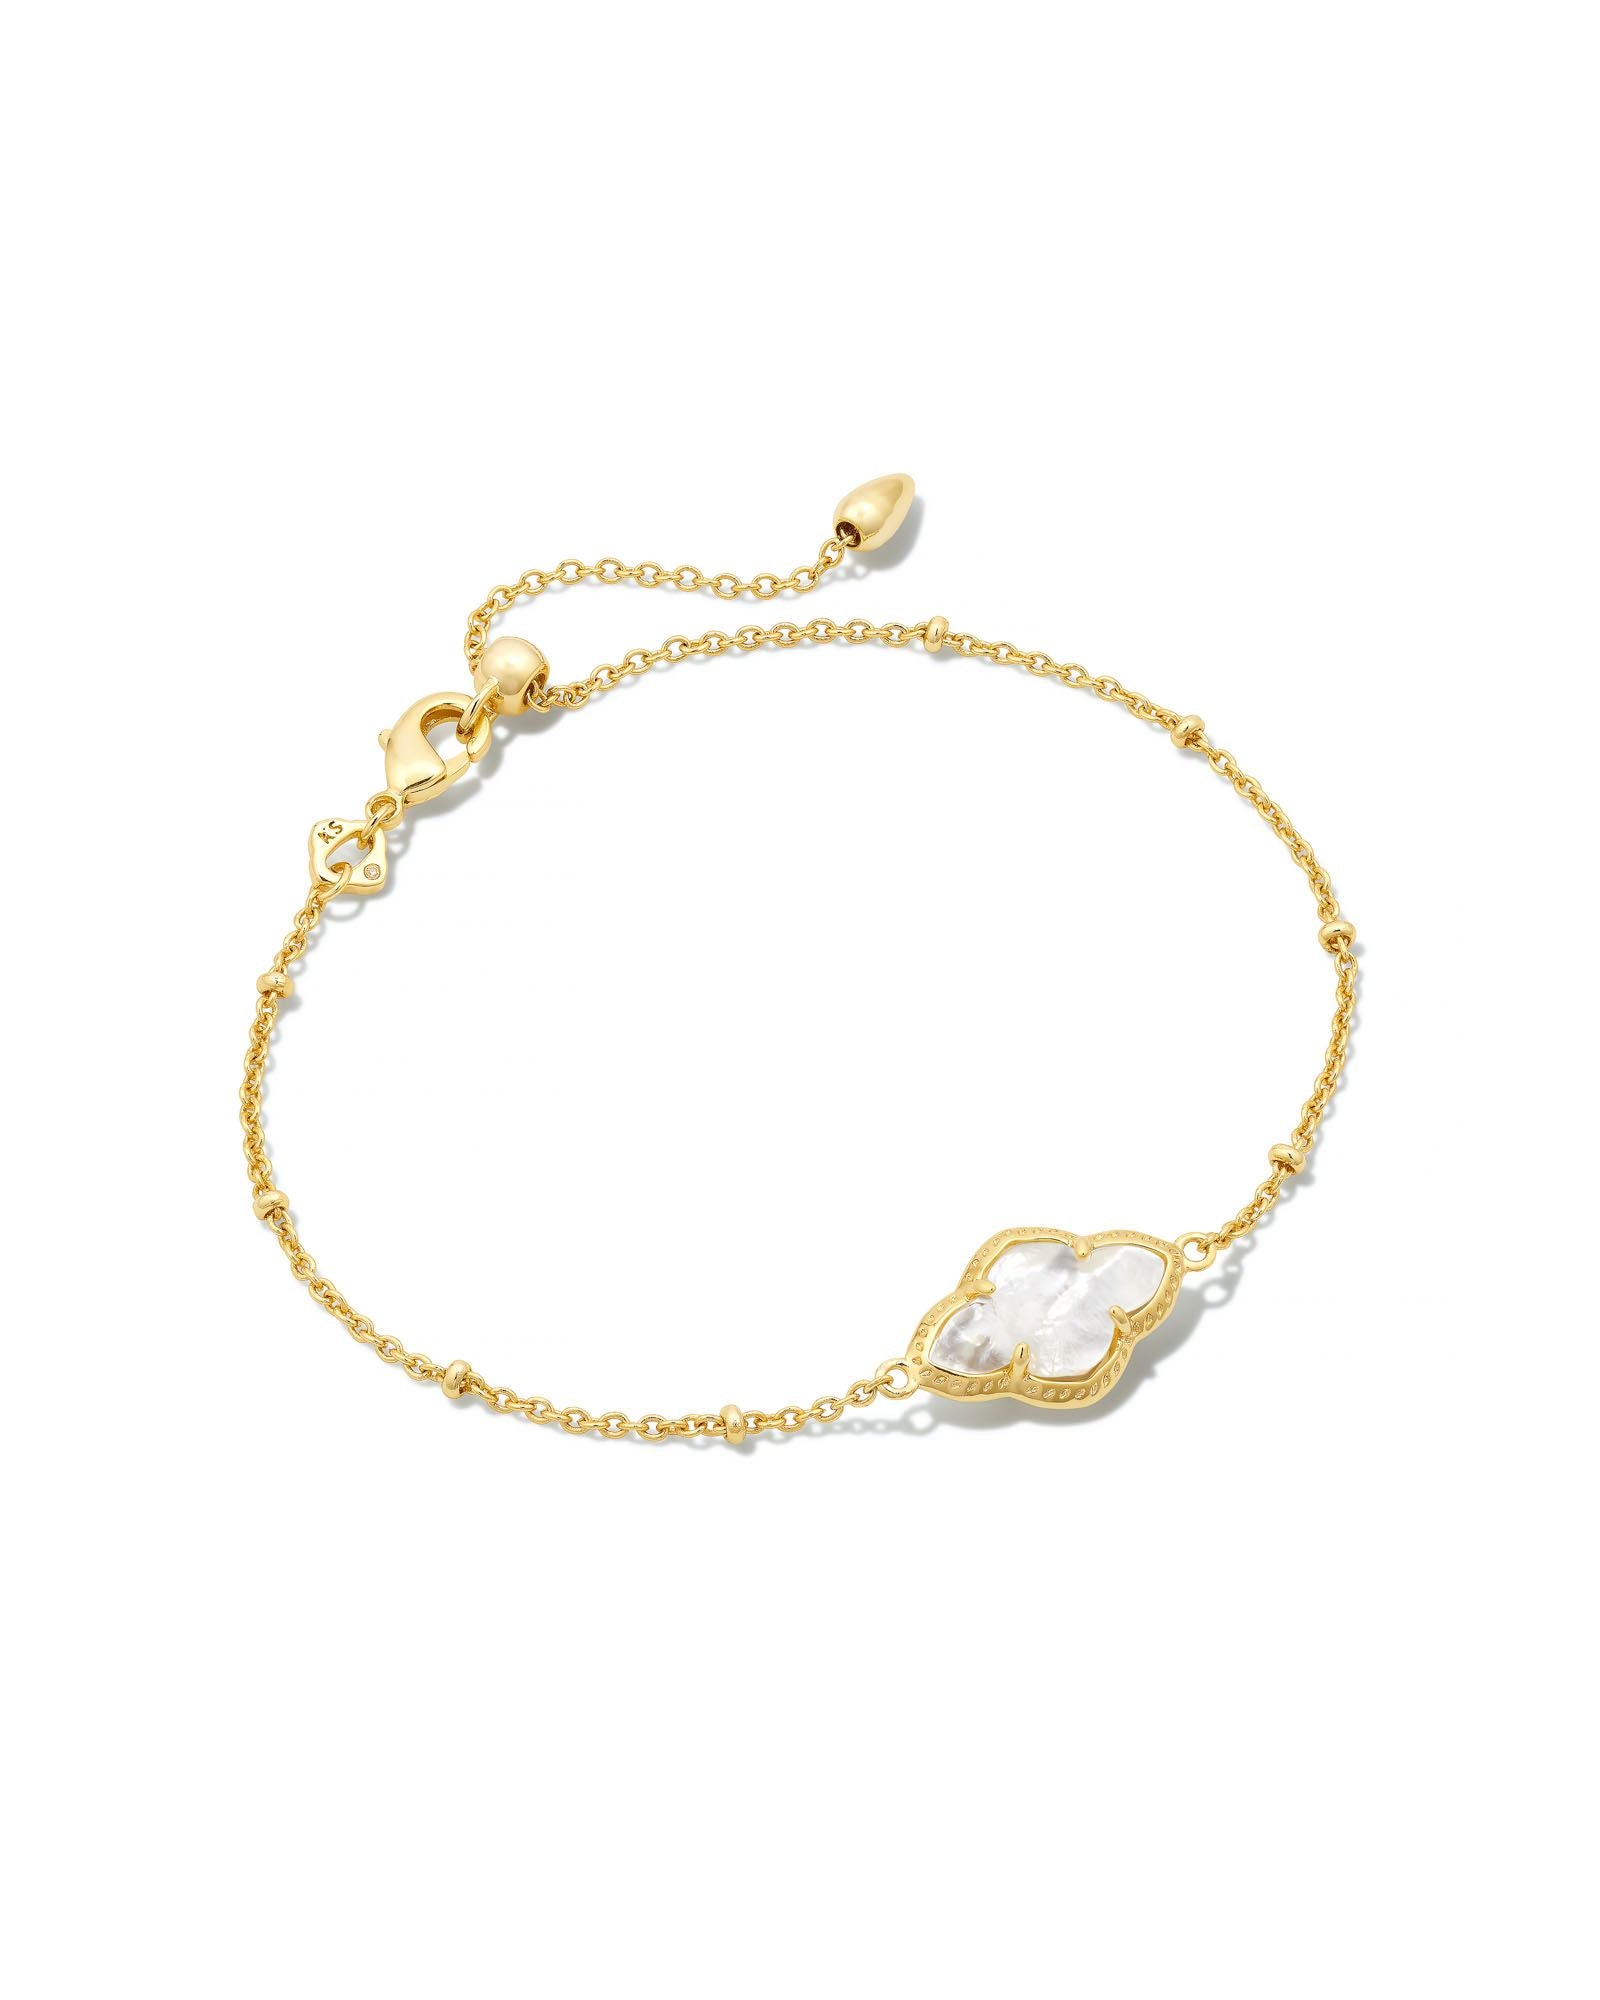 Abbie Satellite Chain Bracelet in Gold Ivory Mother of Pearl